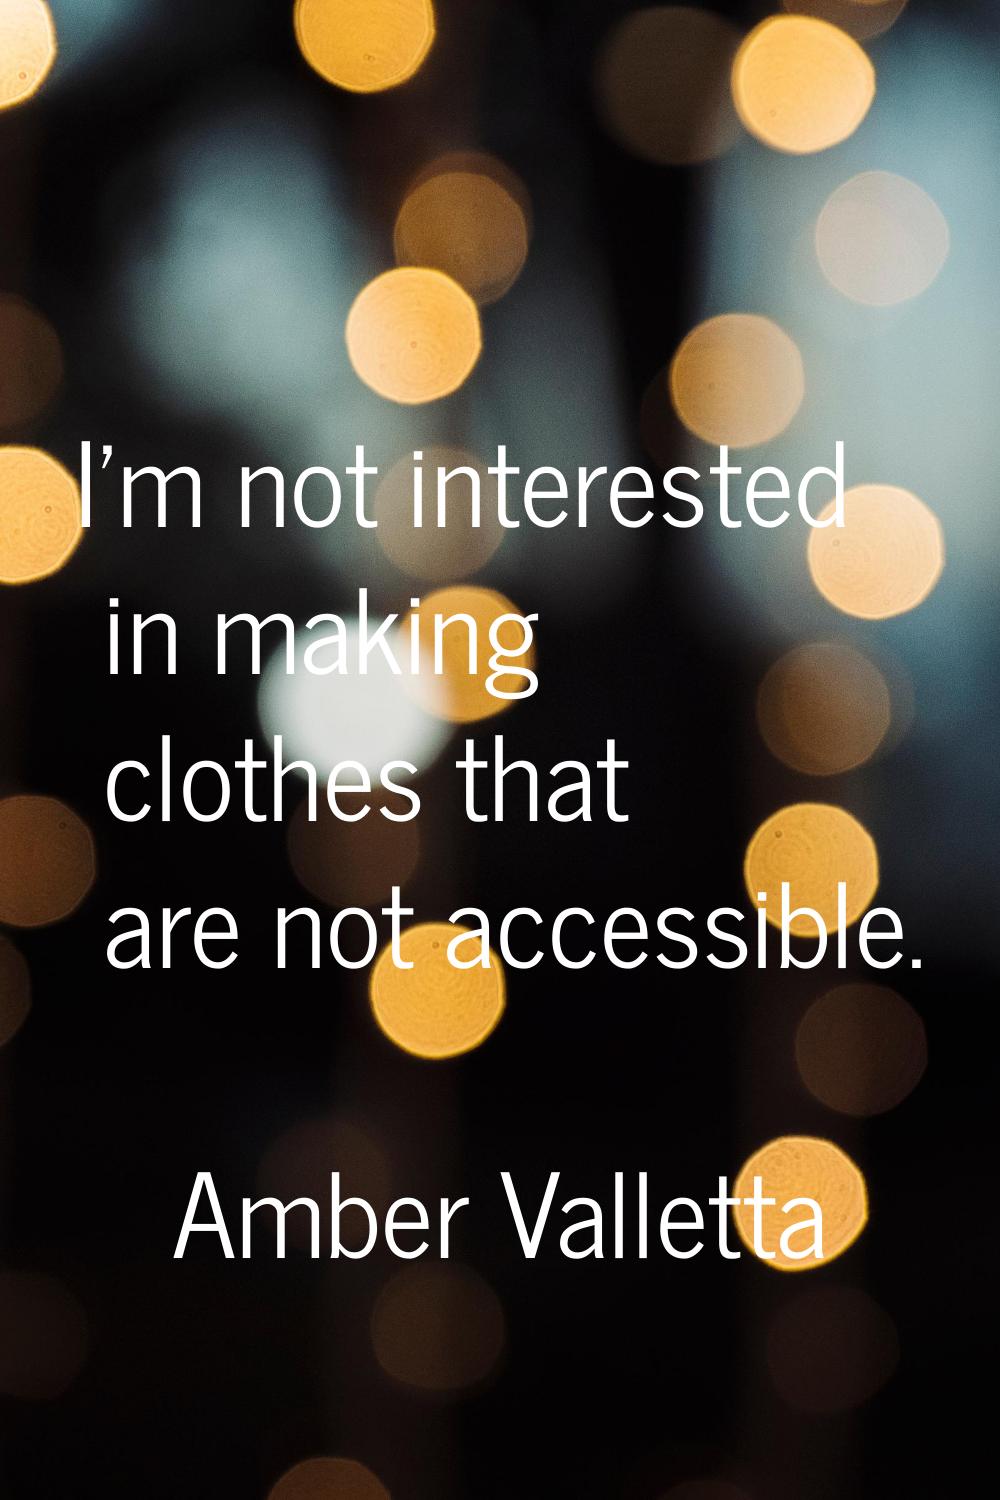 I'm not interested in making clothes that are not accessible.